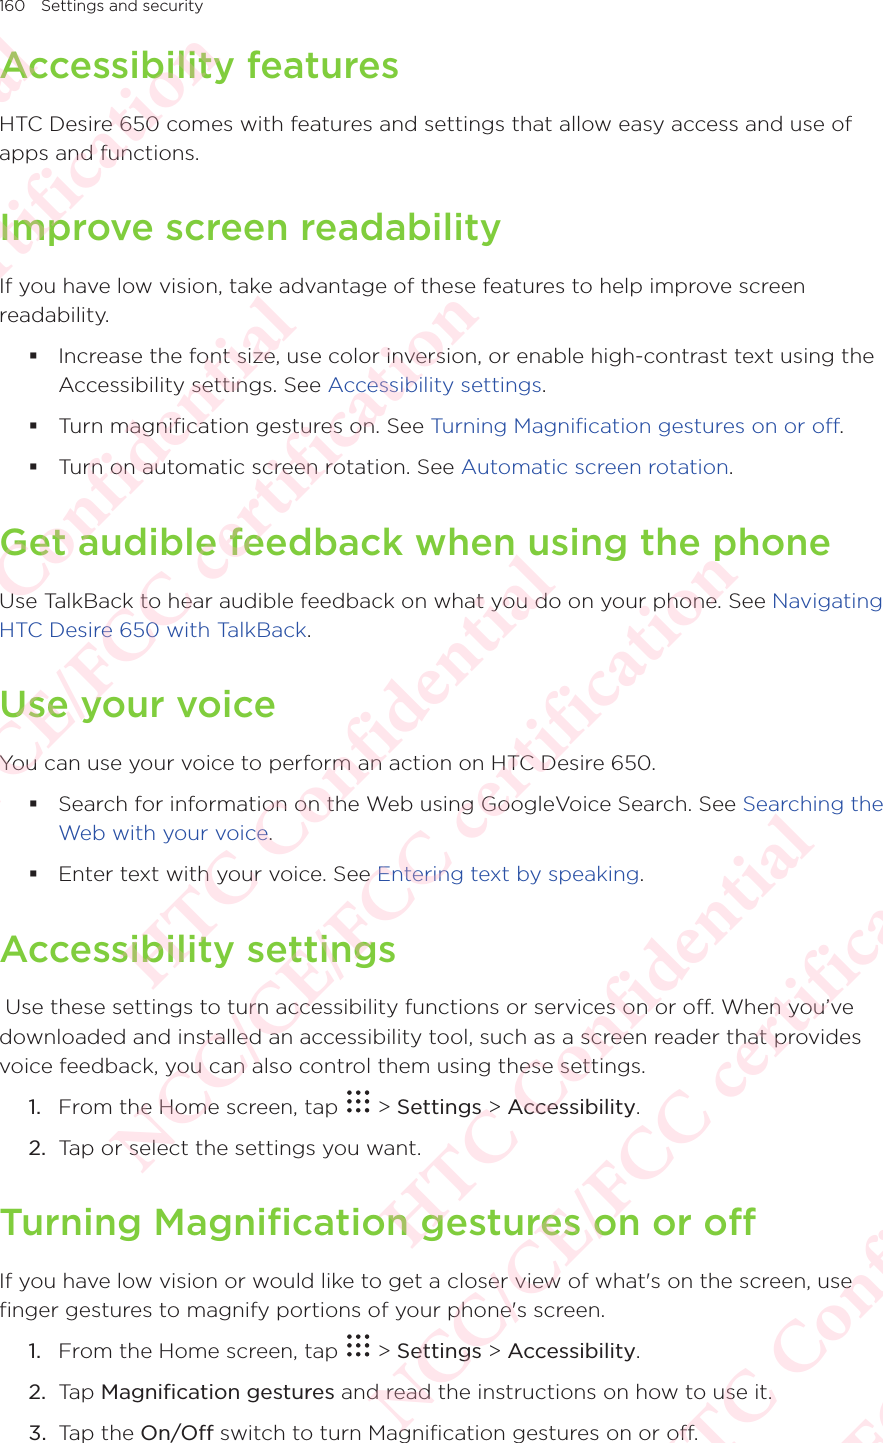 160 Settings and securityAccessibility featuresHTC Desire 650 comes with features and settings that allow easy access and use of apps and functions. Improve screen readabilityIf you have low vision, take advantage of these features to help improve screen readability.  Increase the font size, use color inversion, or enable high-contrast text using the Accessibility settings. See Accessibility settings.  Turn magnification gestures on. See Turning Magnification gestures on or off.  Turn on automatic screen rotation. See Automatic screen rotation. Get audible feedback when using the phoneUse TalkBack to hear audible feedback on what you do on your phone. See Navigating HTC Desire 650 with TalkBack. Use your voiceYou can use your voice to perform an action on HTC Desire 650.  Search for information on the Web using GoogleVoice Search. See Searching the Web with your voice.  Enter text with your voice. See Entering text by speaking. Accessibility settings Use these settings to turn accessibility functions or services on or off. When you’ve downloaded and installed an accessibility tool, such as a screen reader that provides voice feedback, you can also control them using these settings.1.  From the Home screen, tap   &gt; Settings &gt; Accessibility. 2.  Tap or select the settings you want. Turning Magnification gestures on or offIf you have low vision or would like to get a closer view of what&apos;s on the screen, use finger gestures to magnify portions of your phone&apos;s screen. 1.  From the Home screen, tap   &gt; Settings &gt; Accessibility. 2.  Tap Magnification gestures and read the instructions on how to use it. 3.  Tap the On/Off switch to turn Magnification gestures on or off. HTC Confidential NCC/CE/FCC certification  HTC Confidential NCC/CE/FCC certification  HTC Confidential NCC/CE/FCC certification  HTC Confidential NCC/CE/FCC certification  HTC Confidential NCC/CE/FCC certification